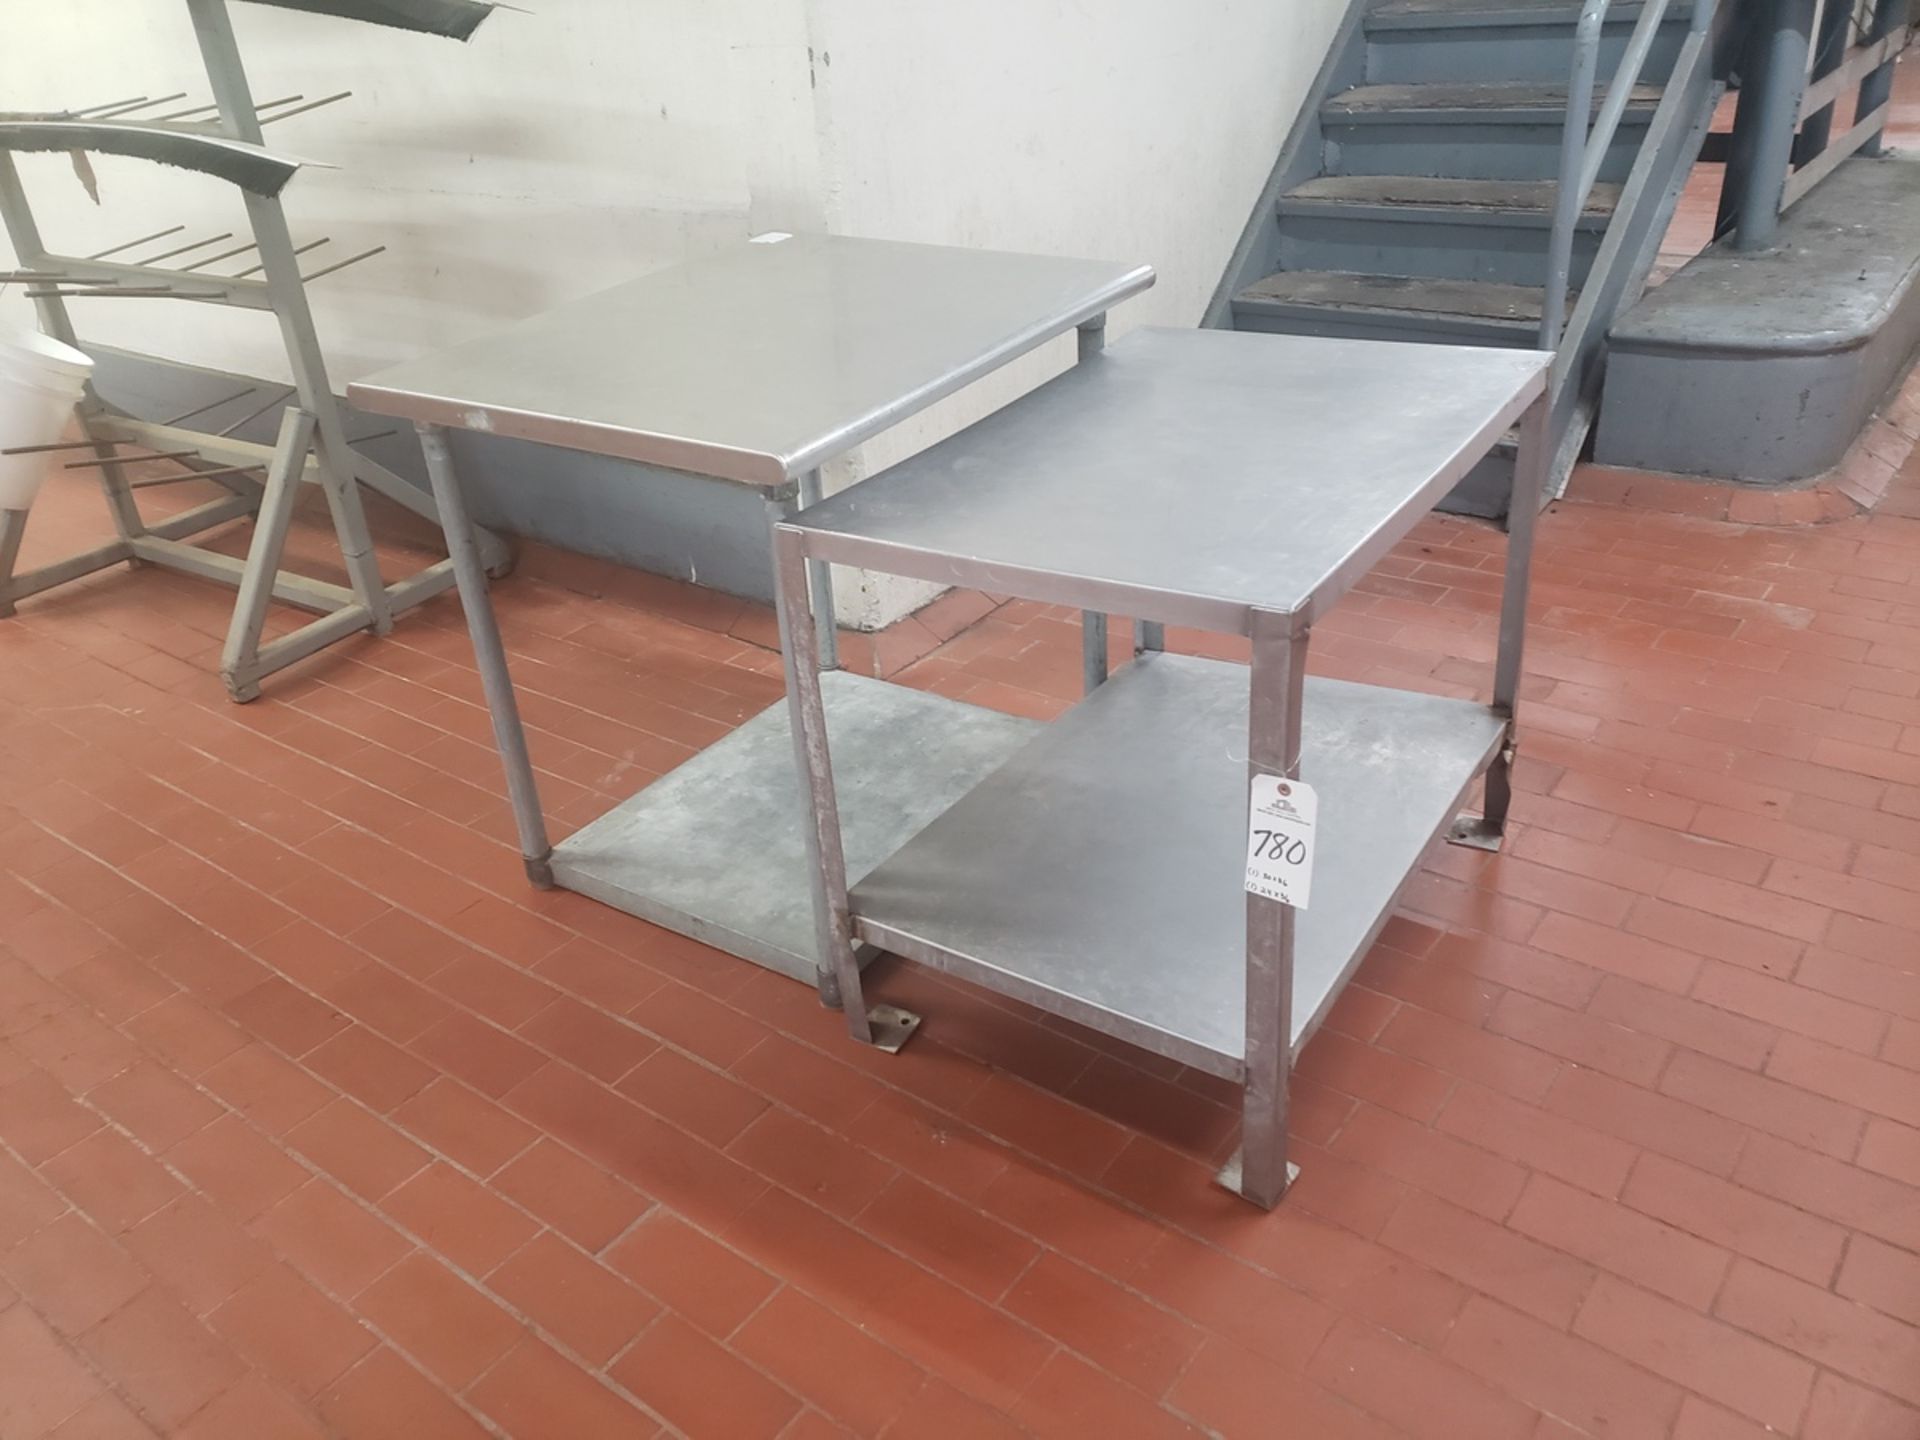 Lot of (2) Stainless Steel Tables, (1) 30" x 36" (1) 24" x 36"